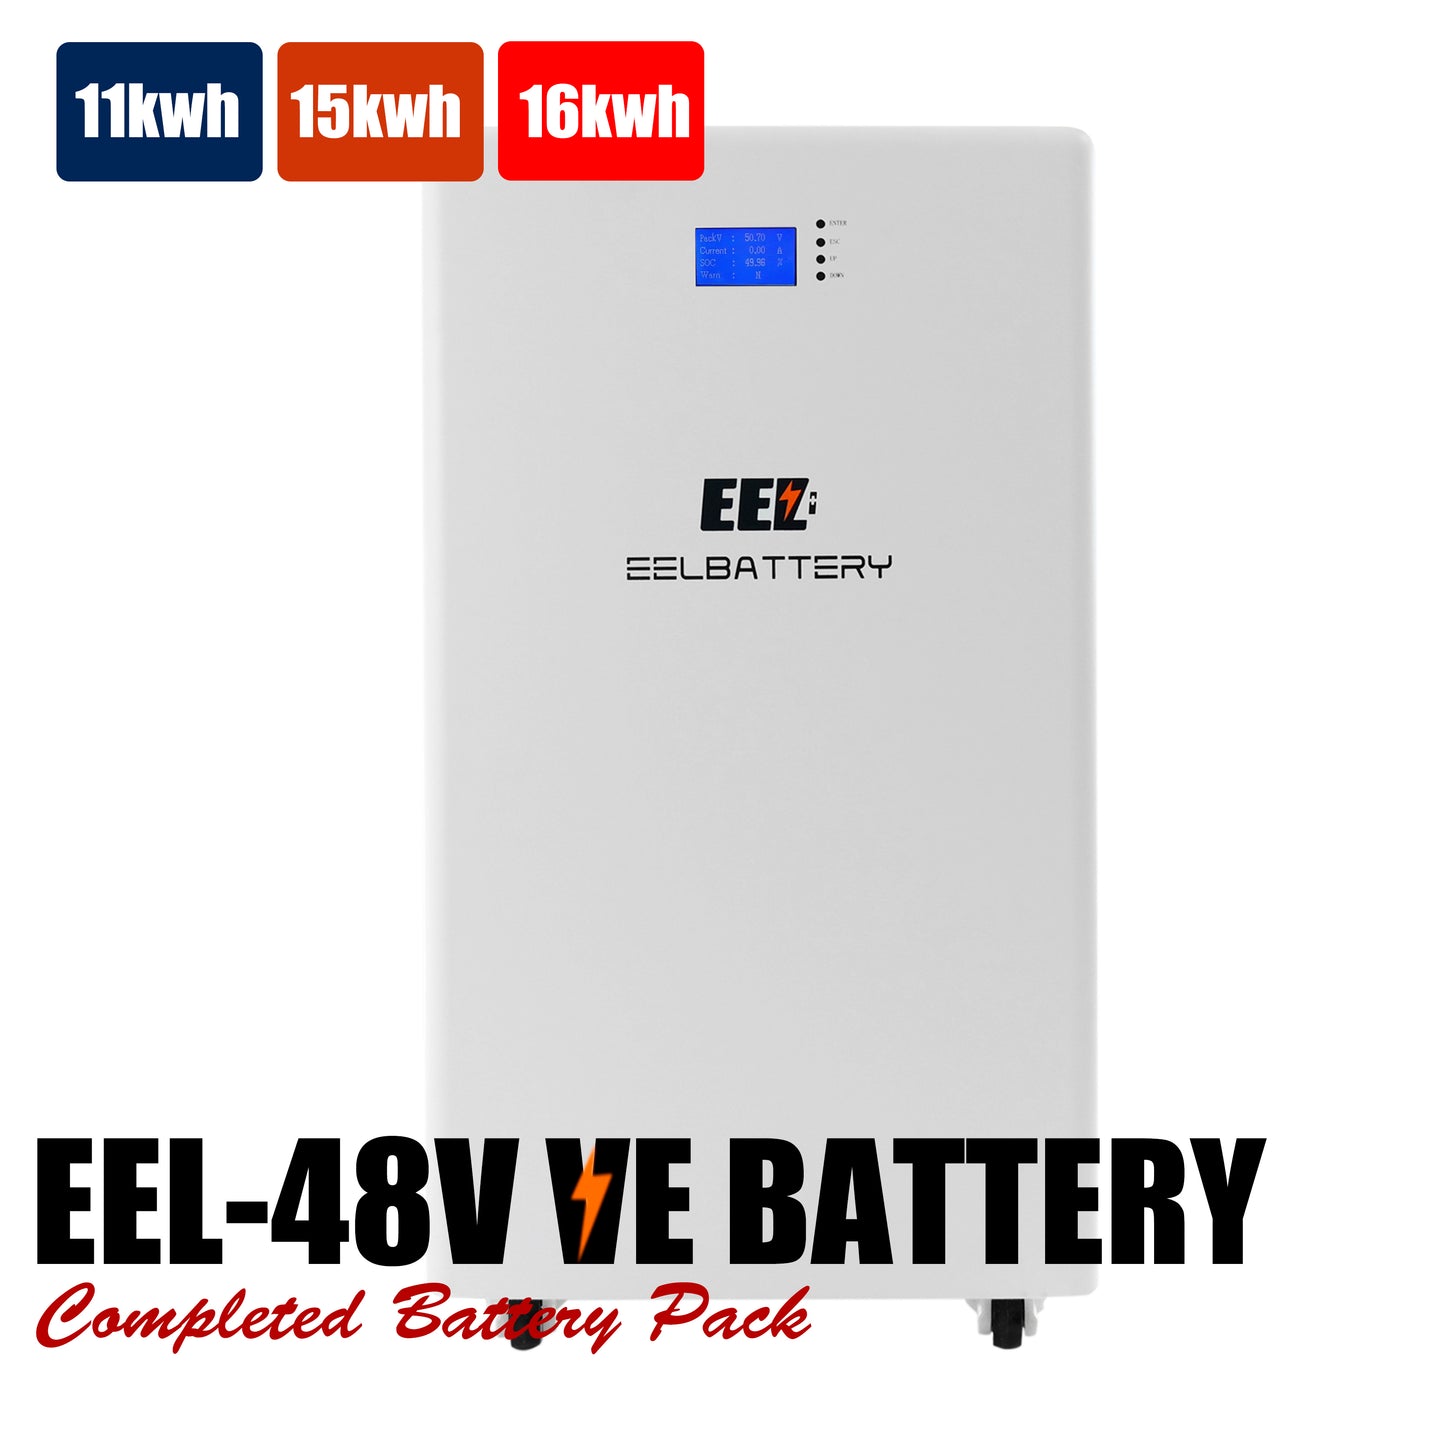 48V 16Kwh EEL Vertical LiFePO4 Battery Pack for Home Power Solar Energy Storage System